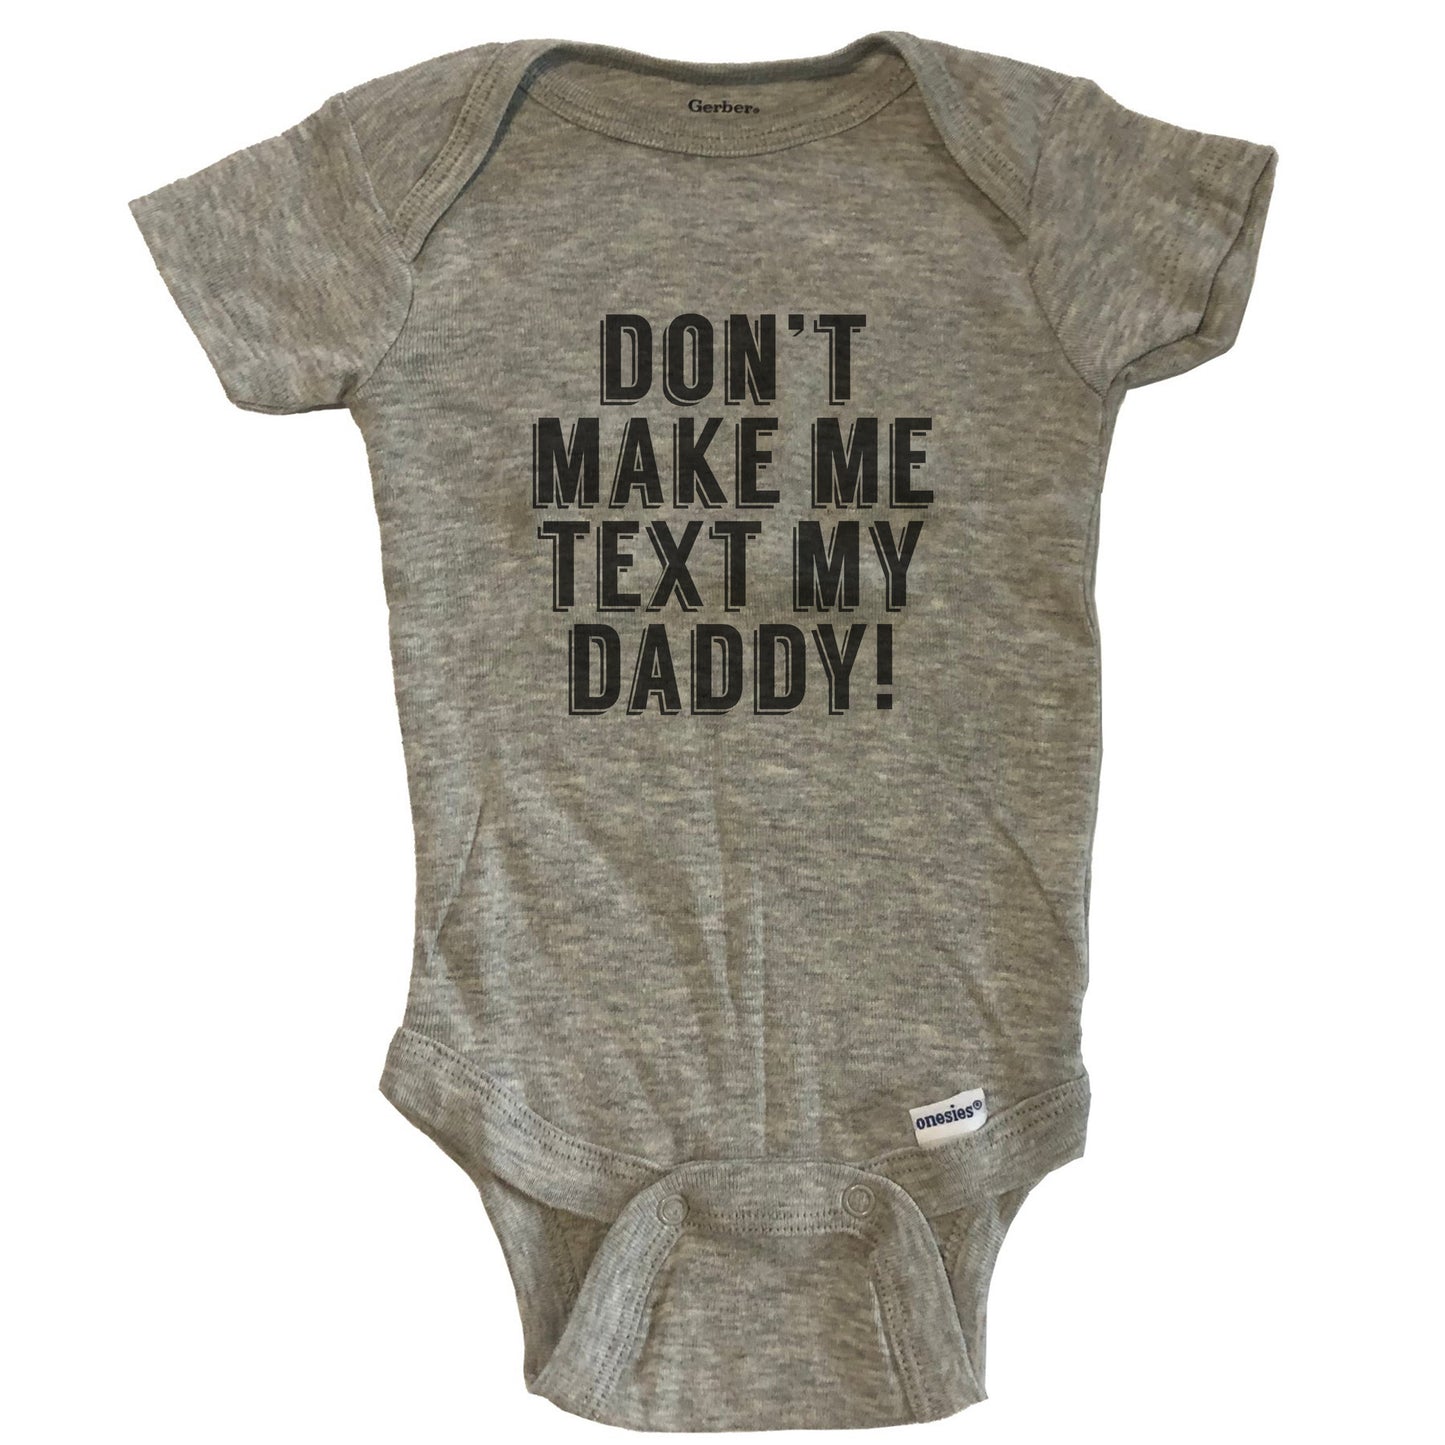 Don’t Make Me Text My Daddy Funny Baby Onesie - Grey